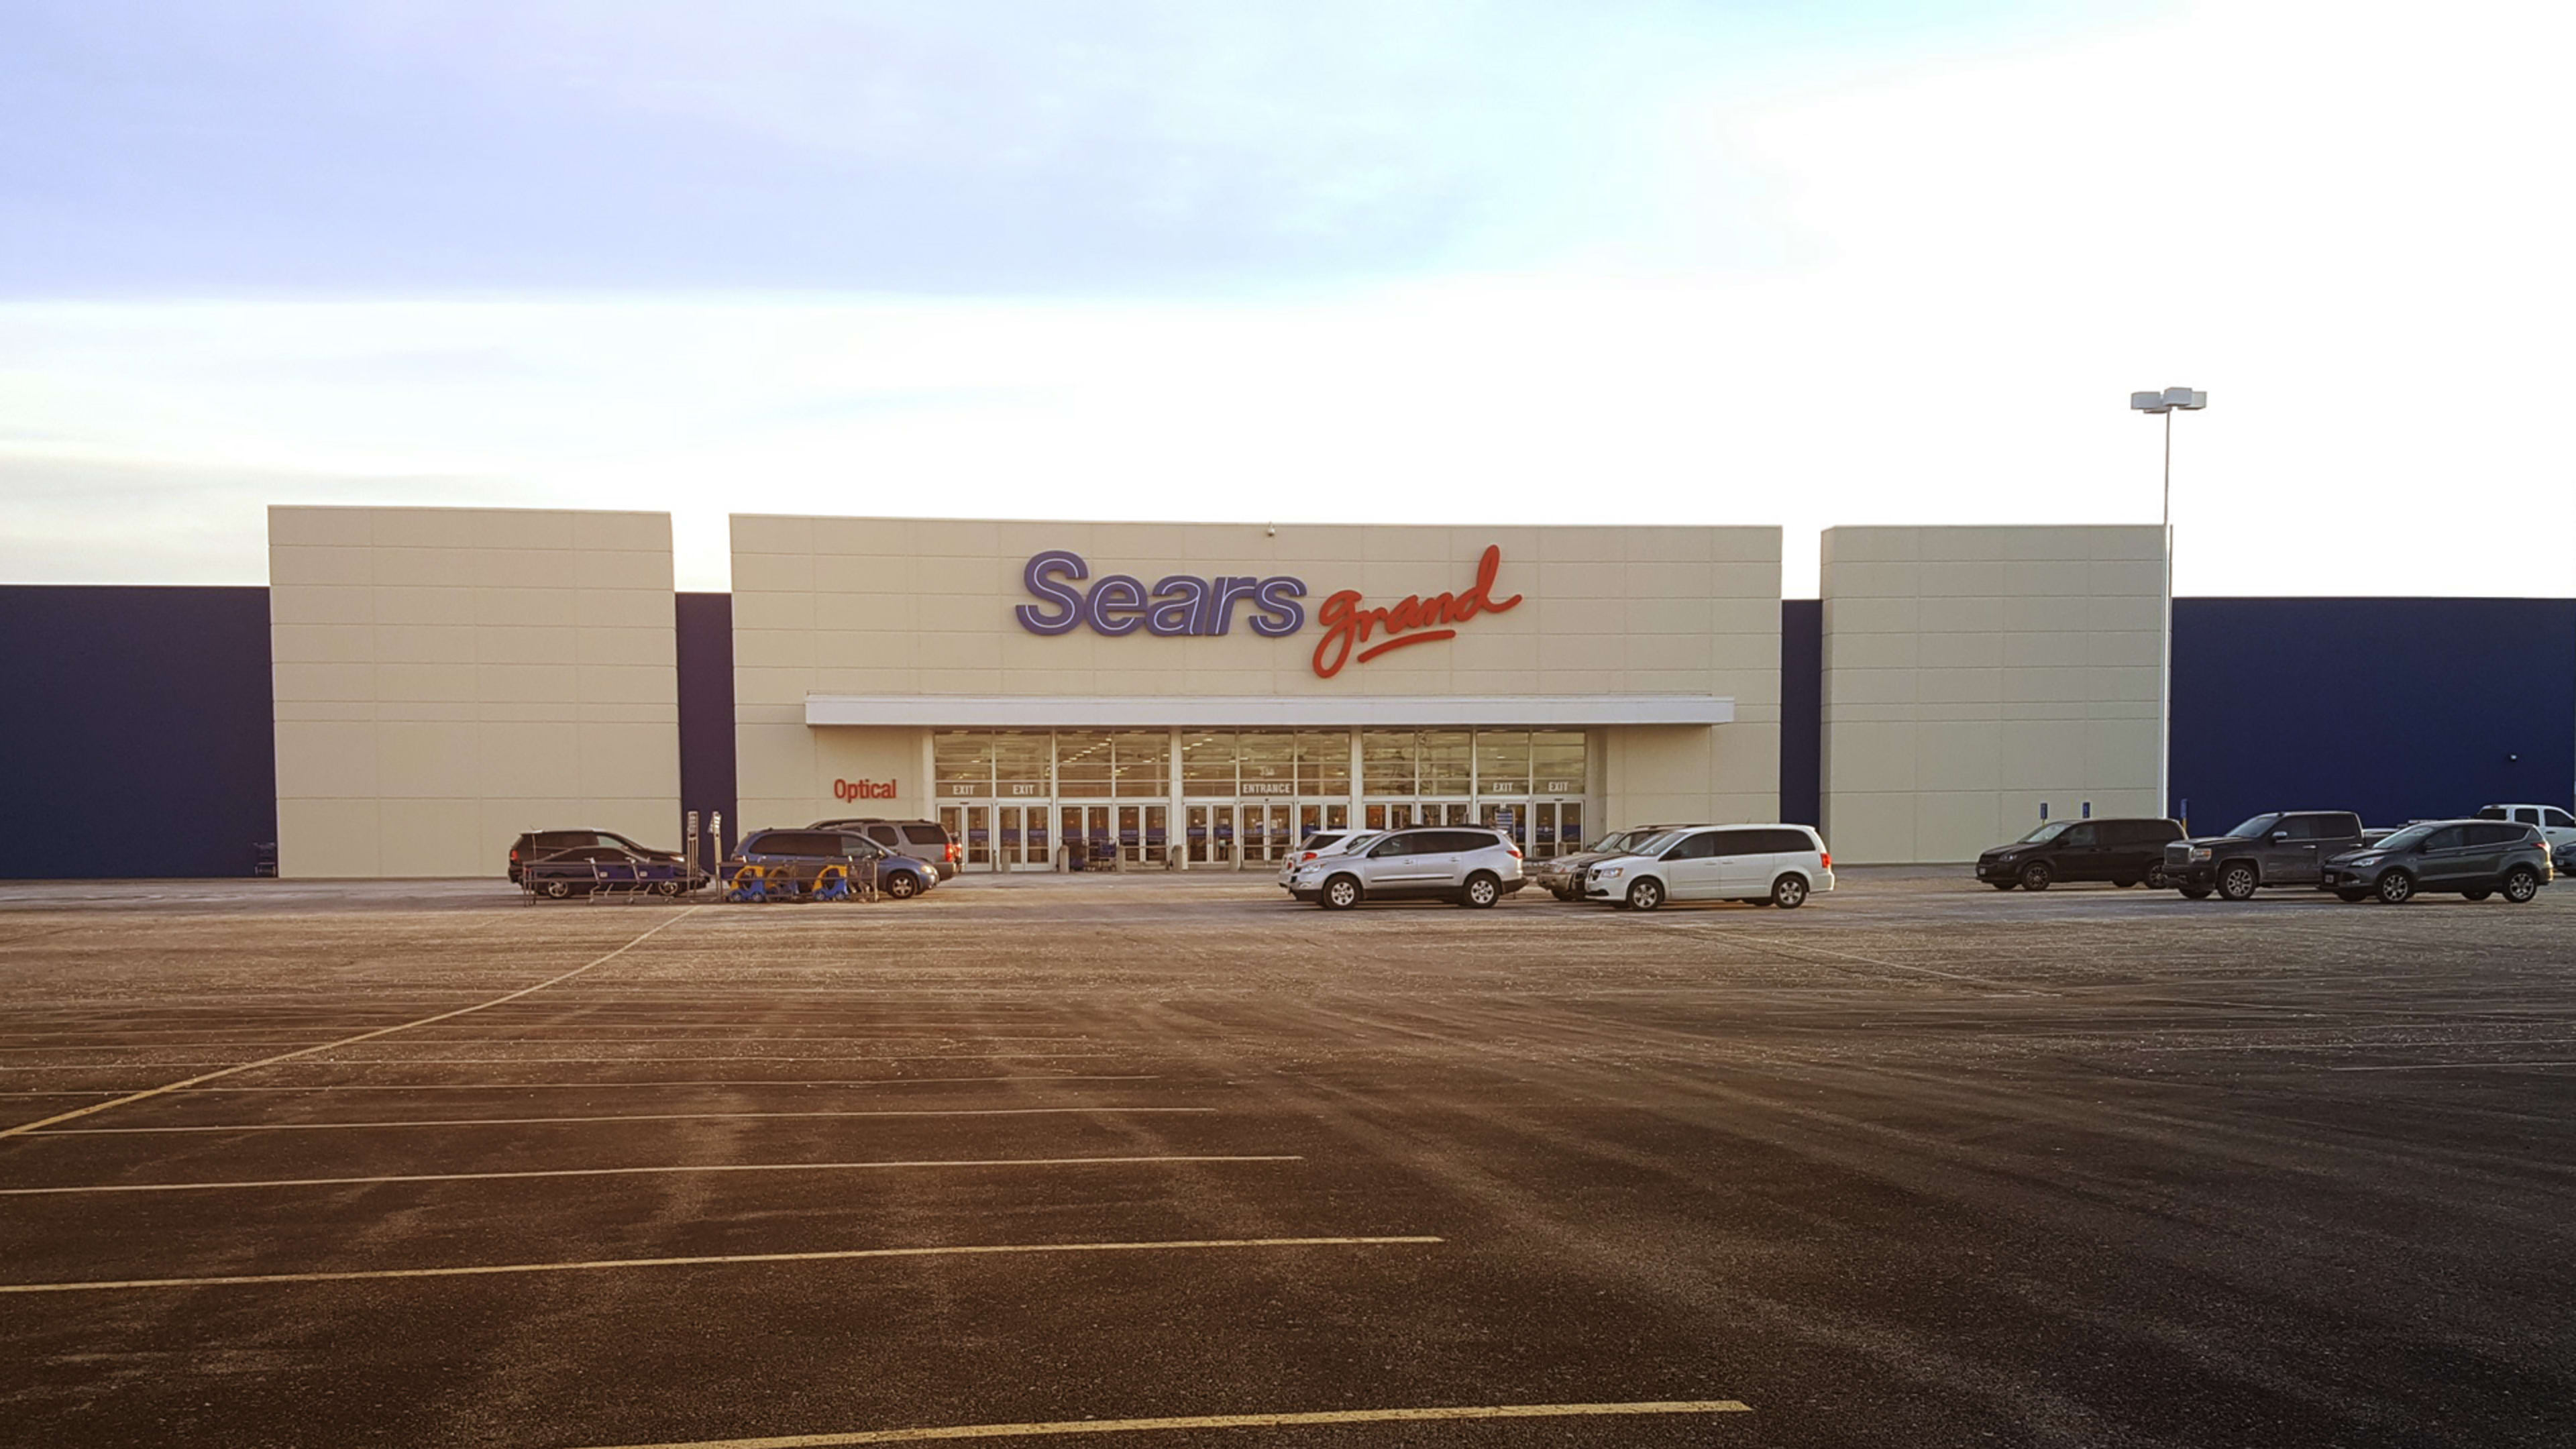 Sears files for bankruptcy as the retail apocalypse continues apace